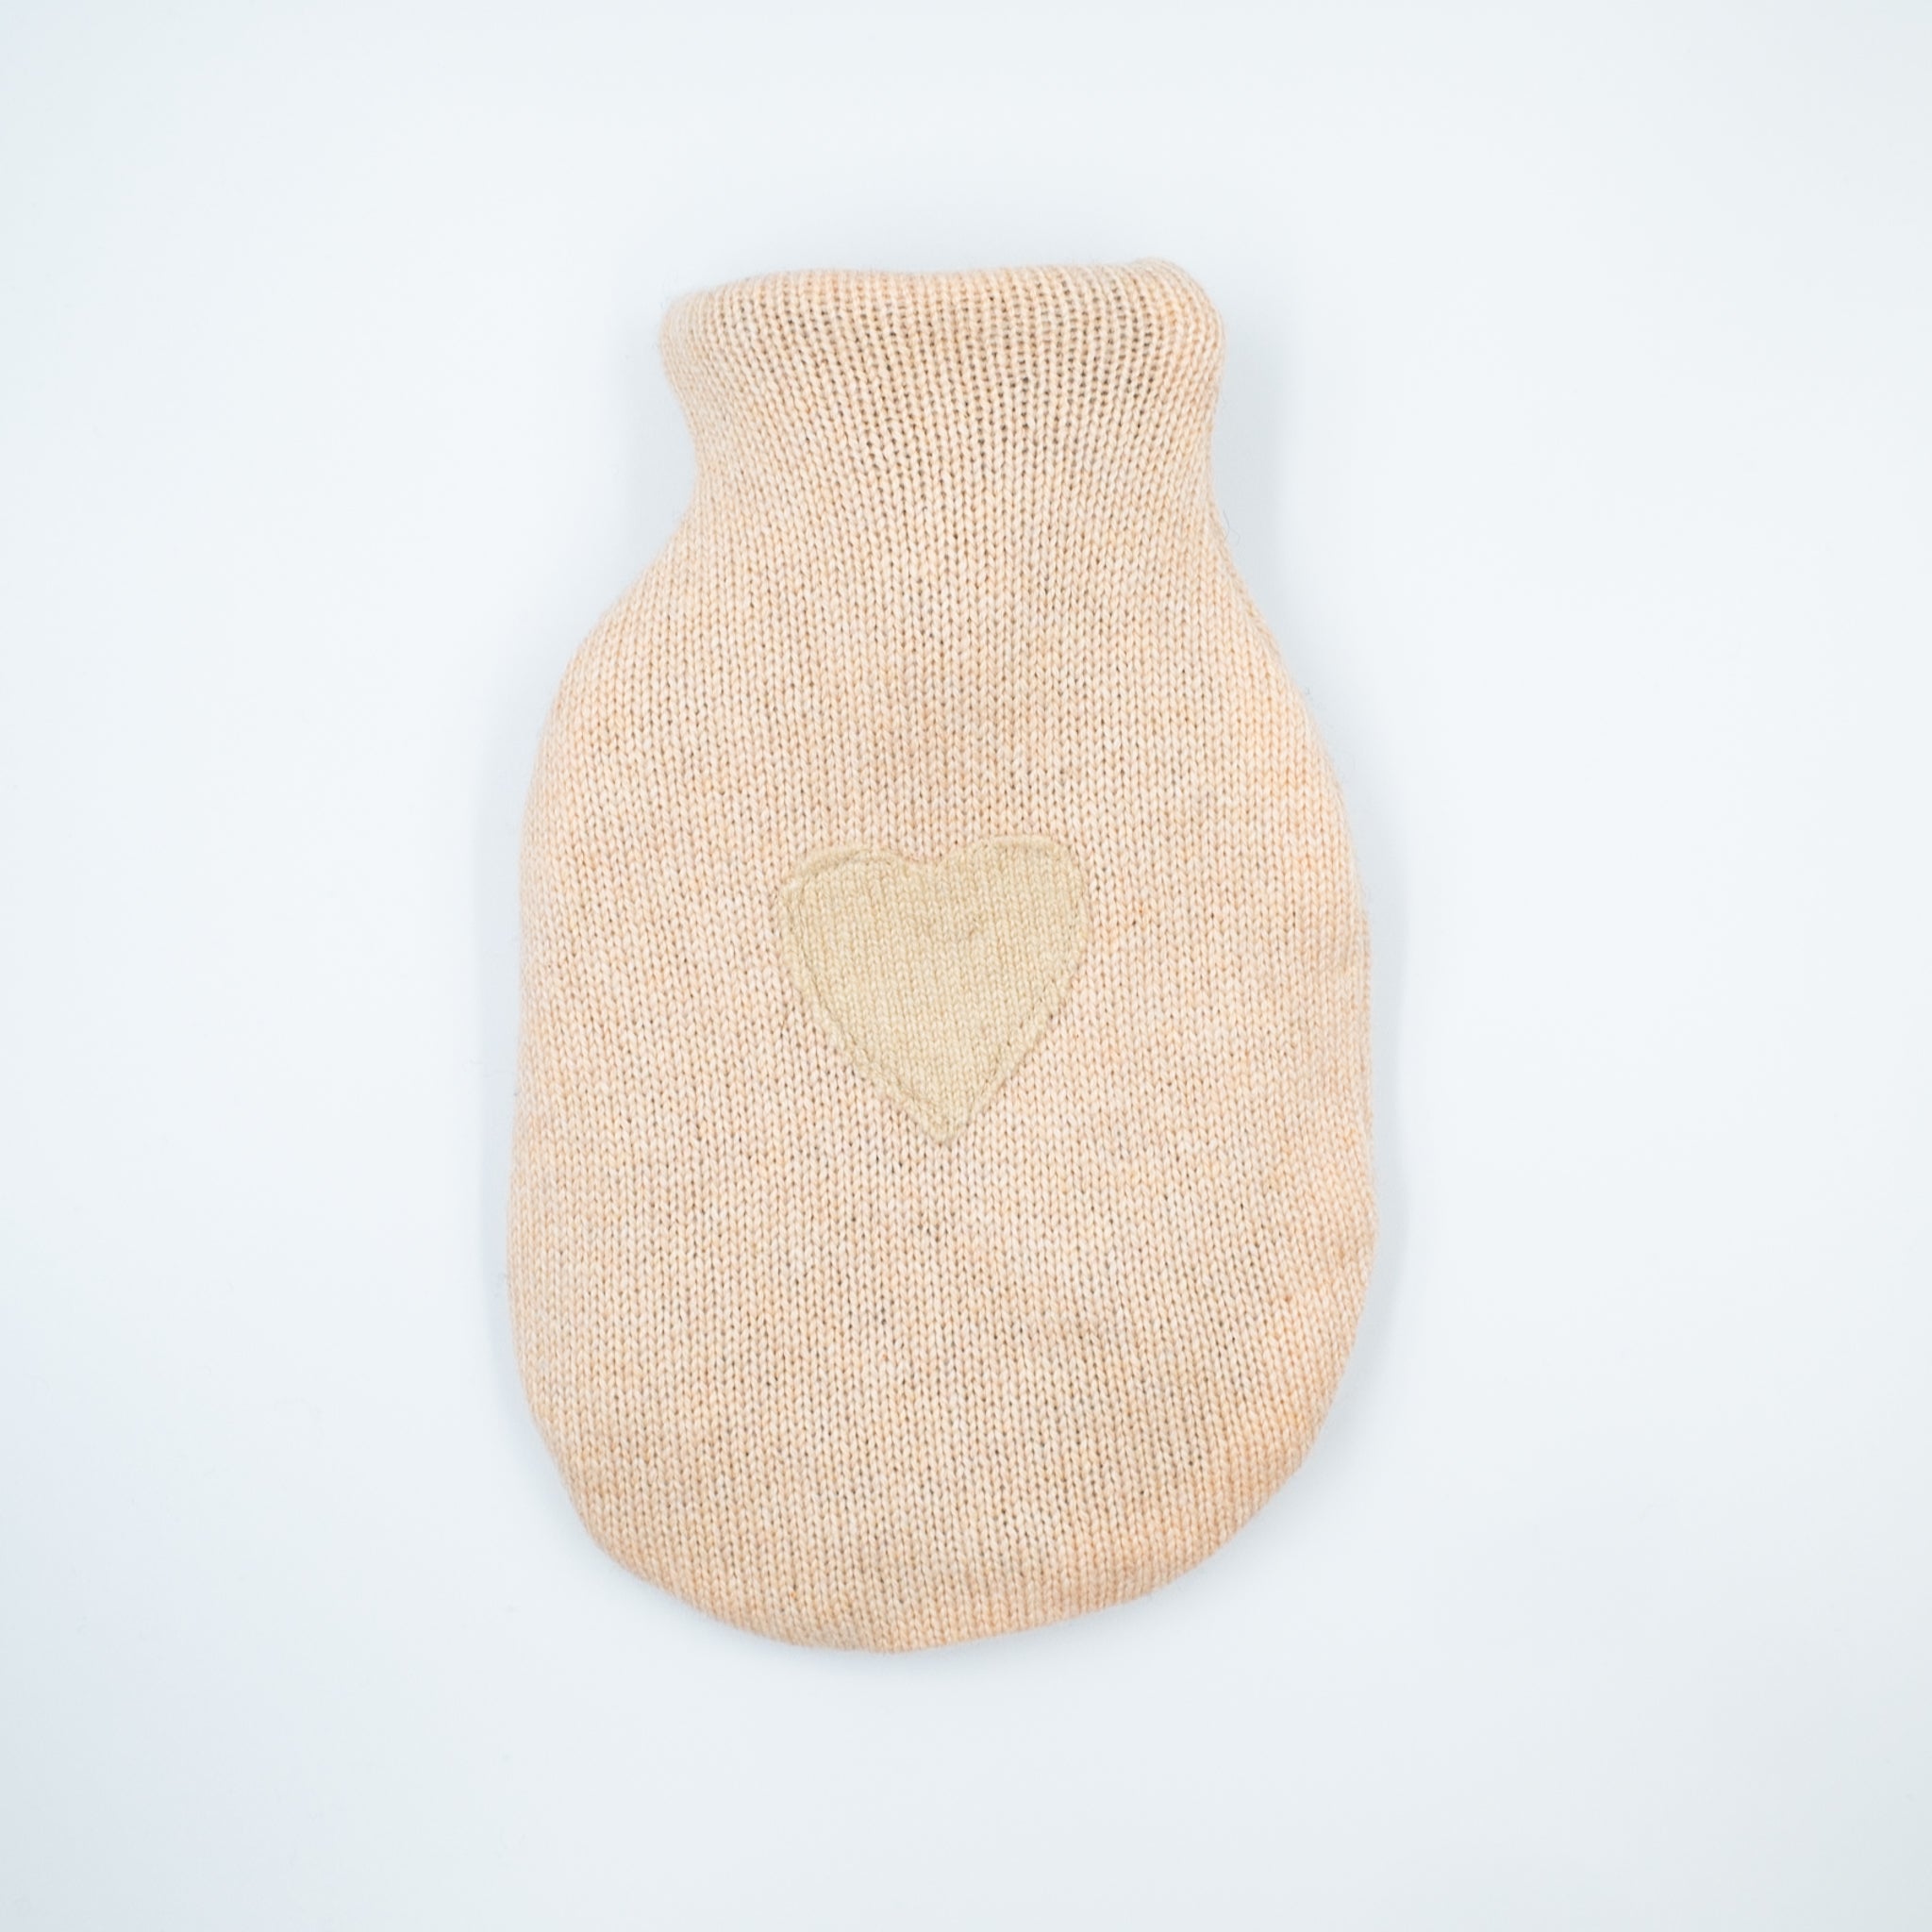 Pale Apricot Cashmere Small Hot Water Bottle